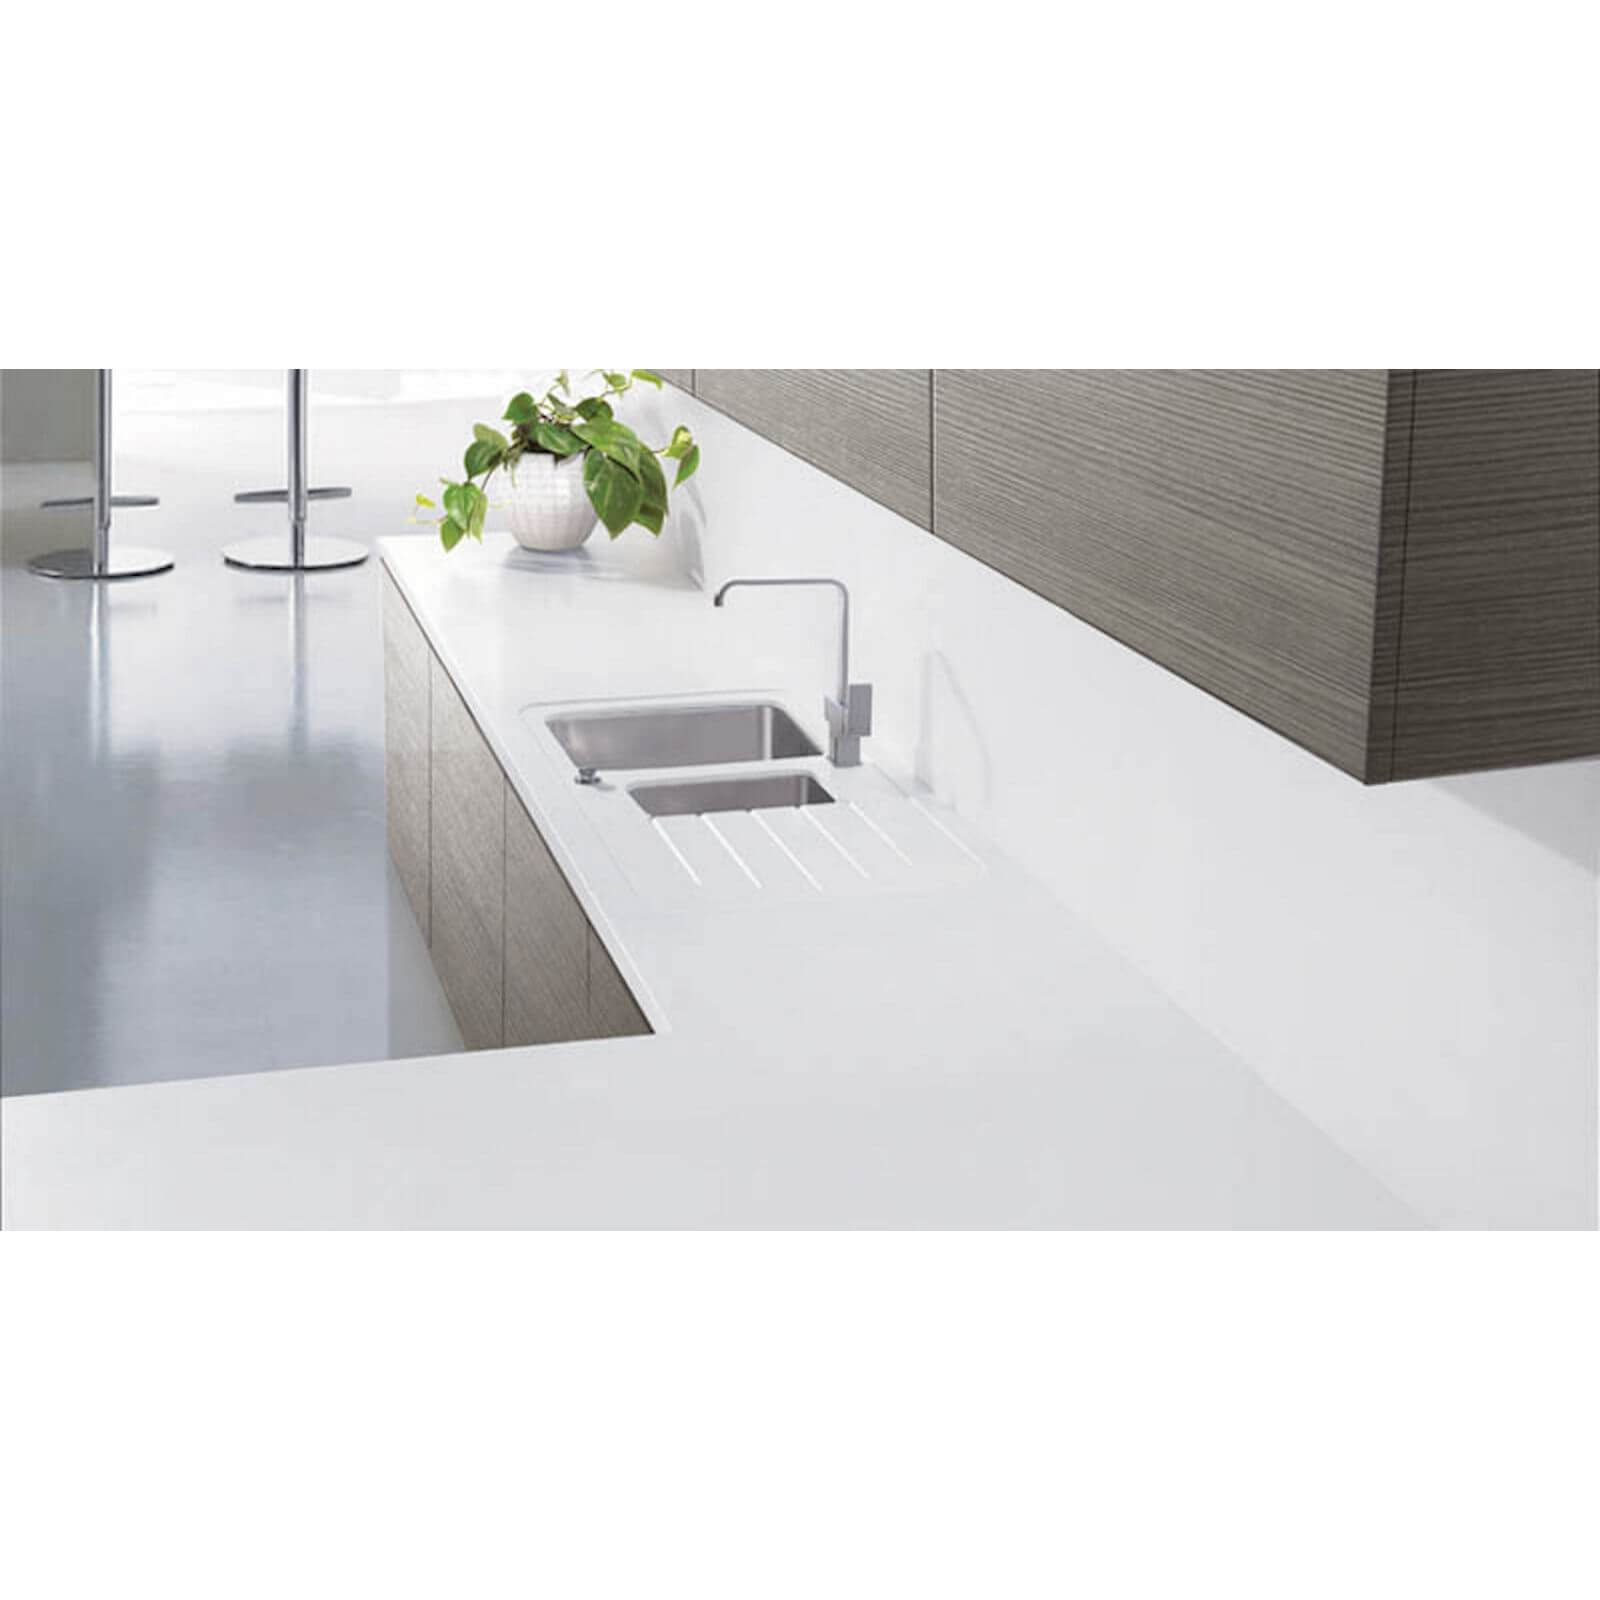 Maia Cristallo Kitchen Sink Worktop - Acrylic 1.5 Duo Right Hand Bowl - 3600 x 650 x 28mm